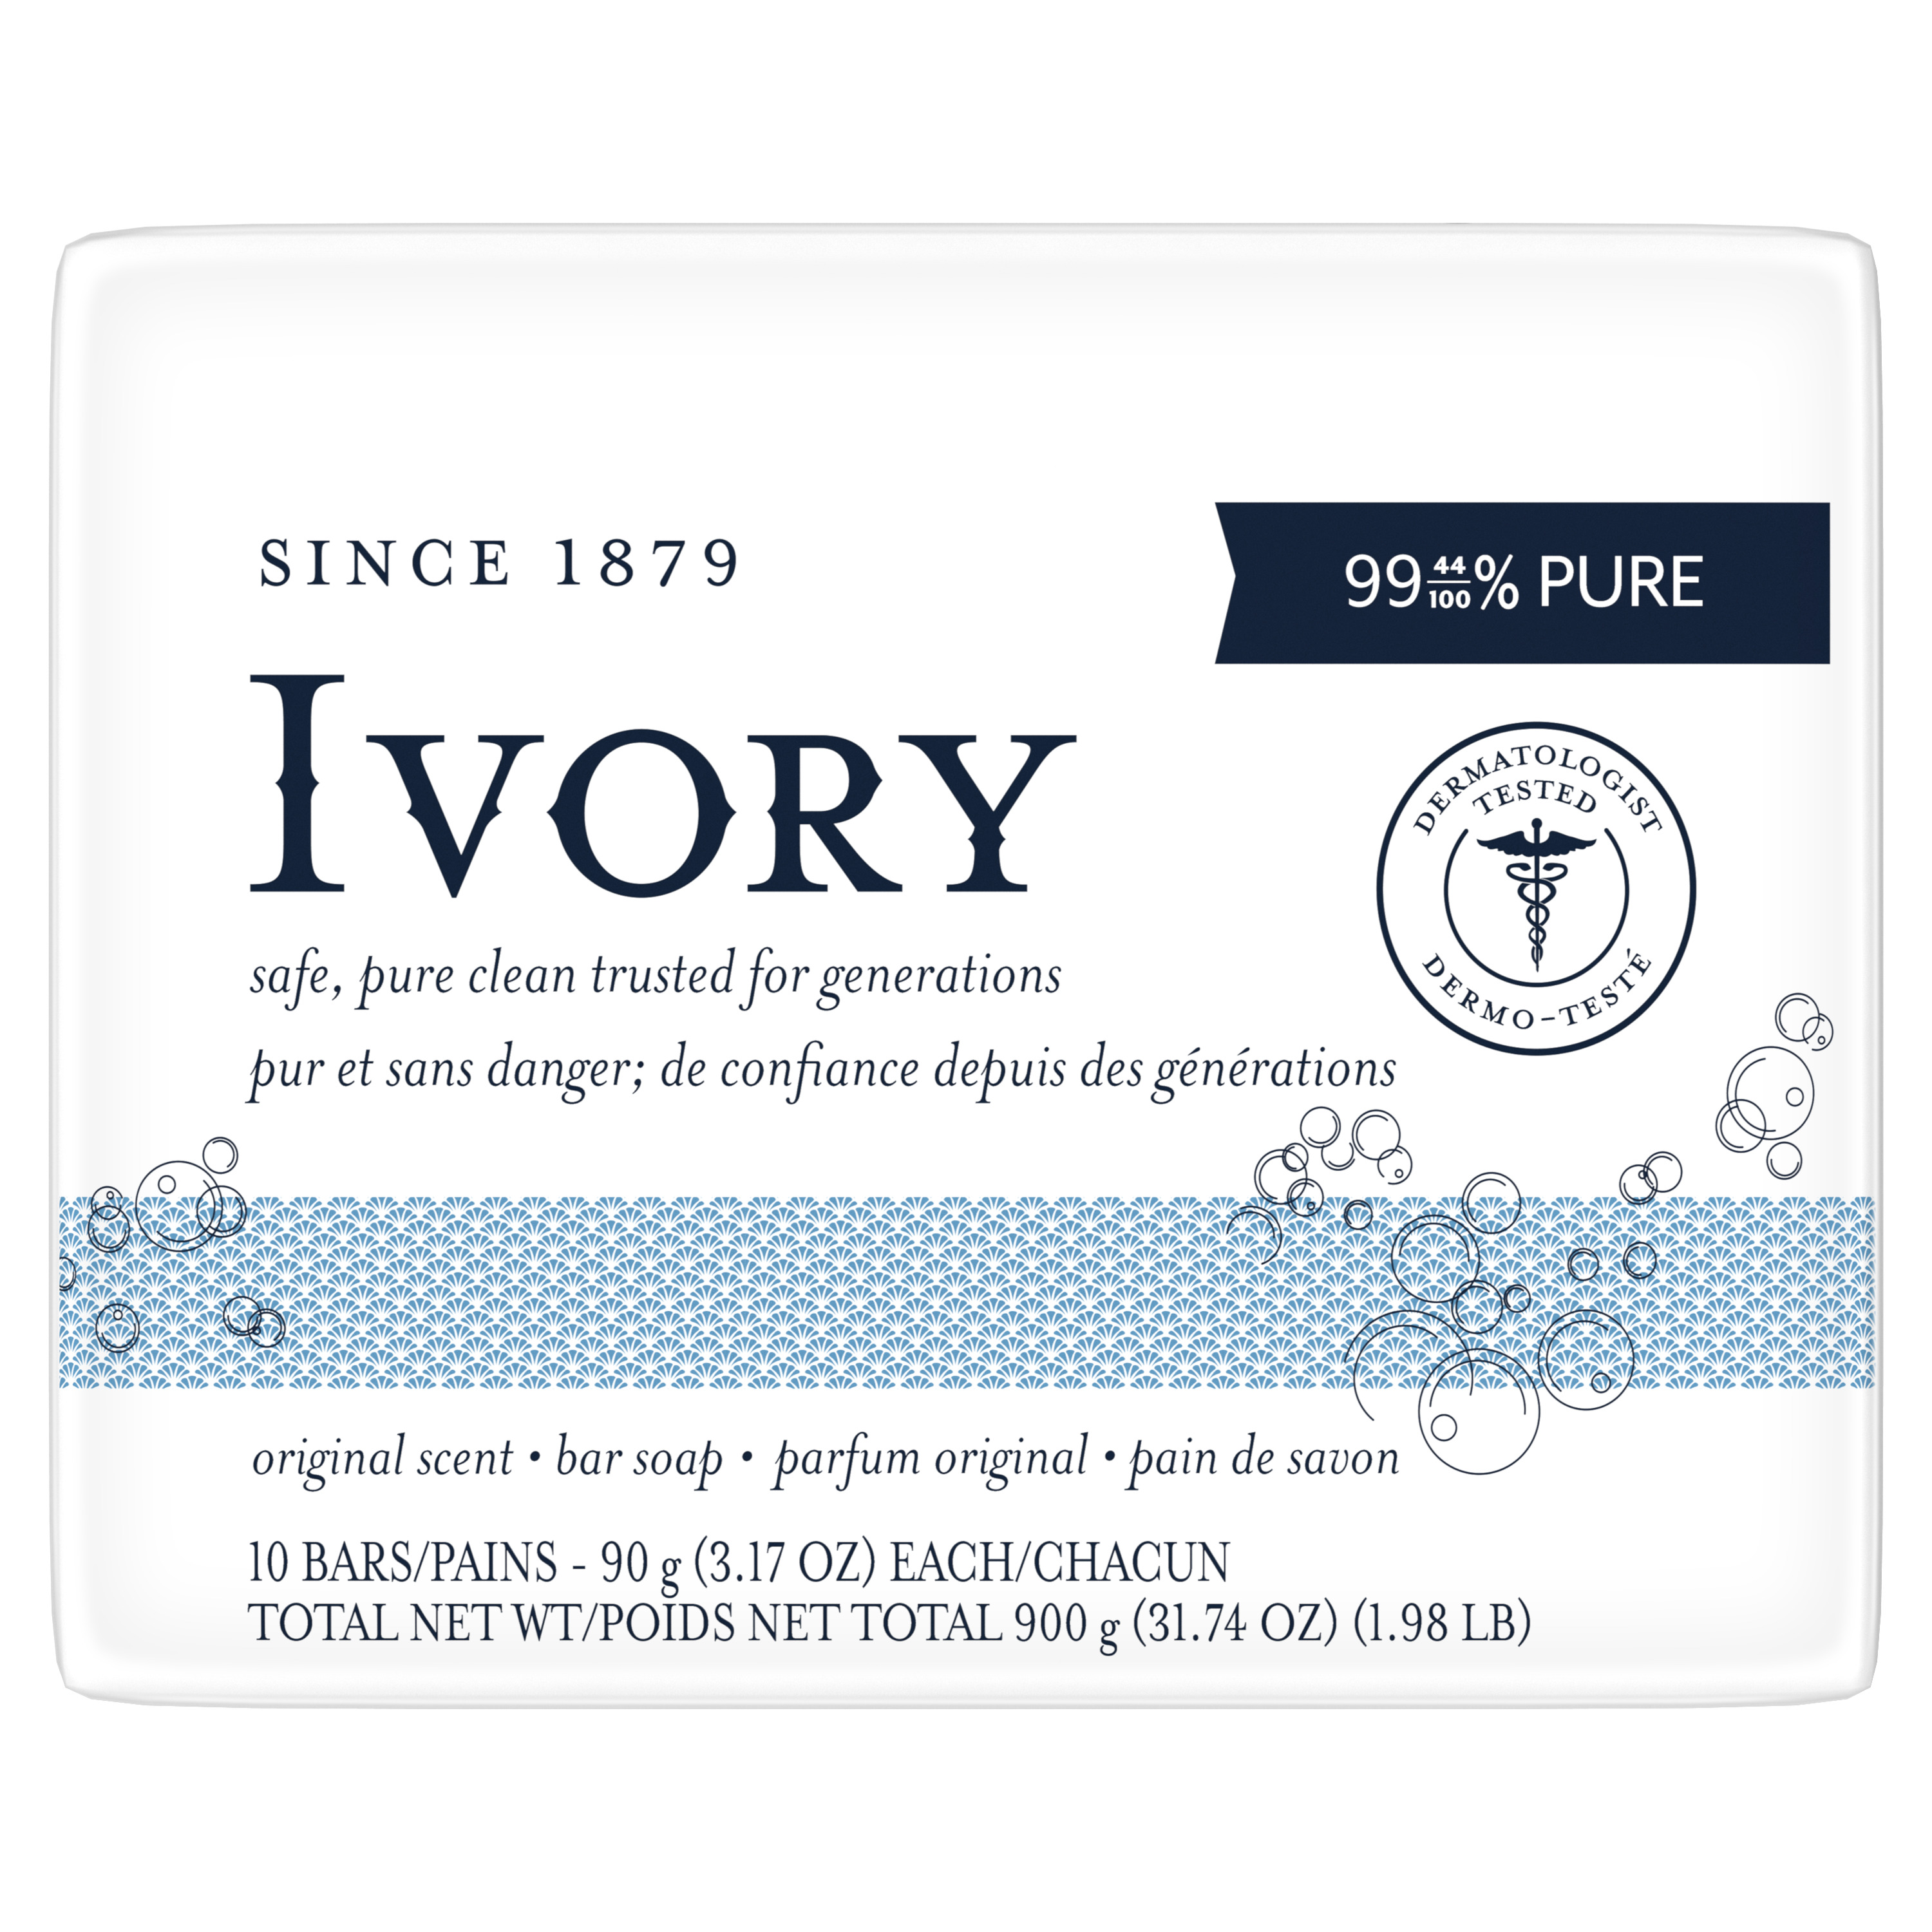 Ivory Bar Soap with Original Scent, 3.17 oz, 10 Count - image 2 of 8